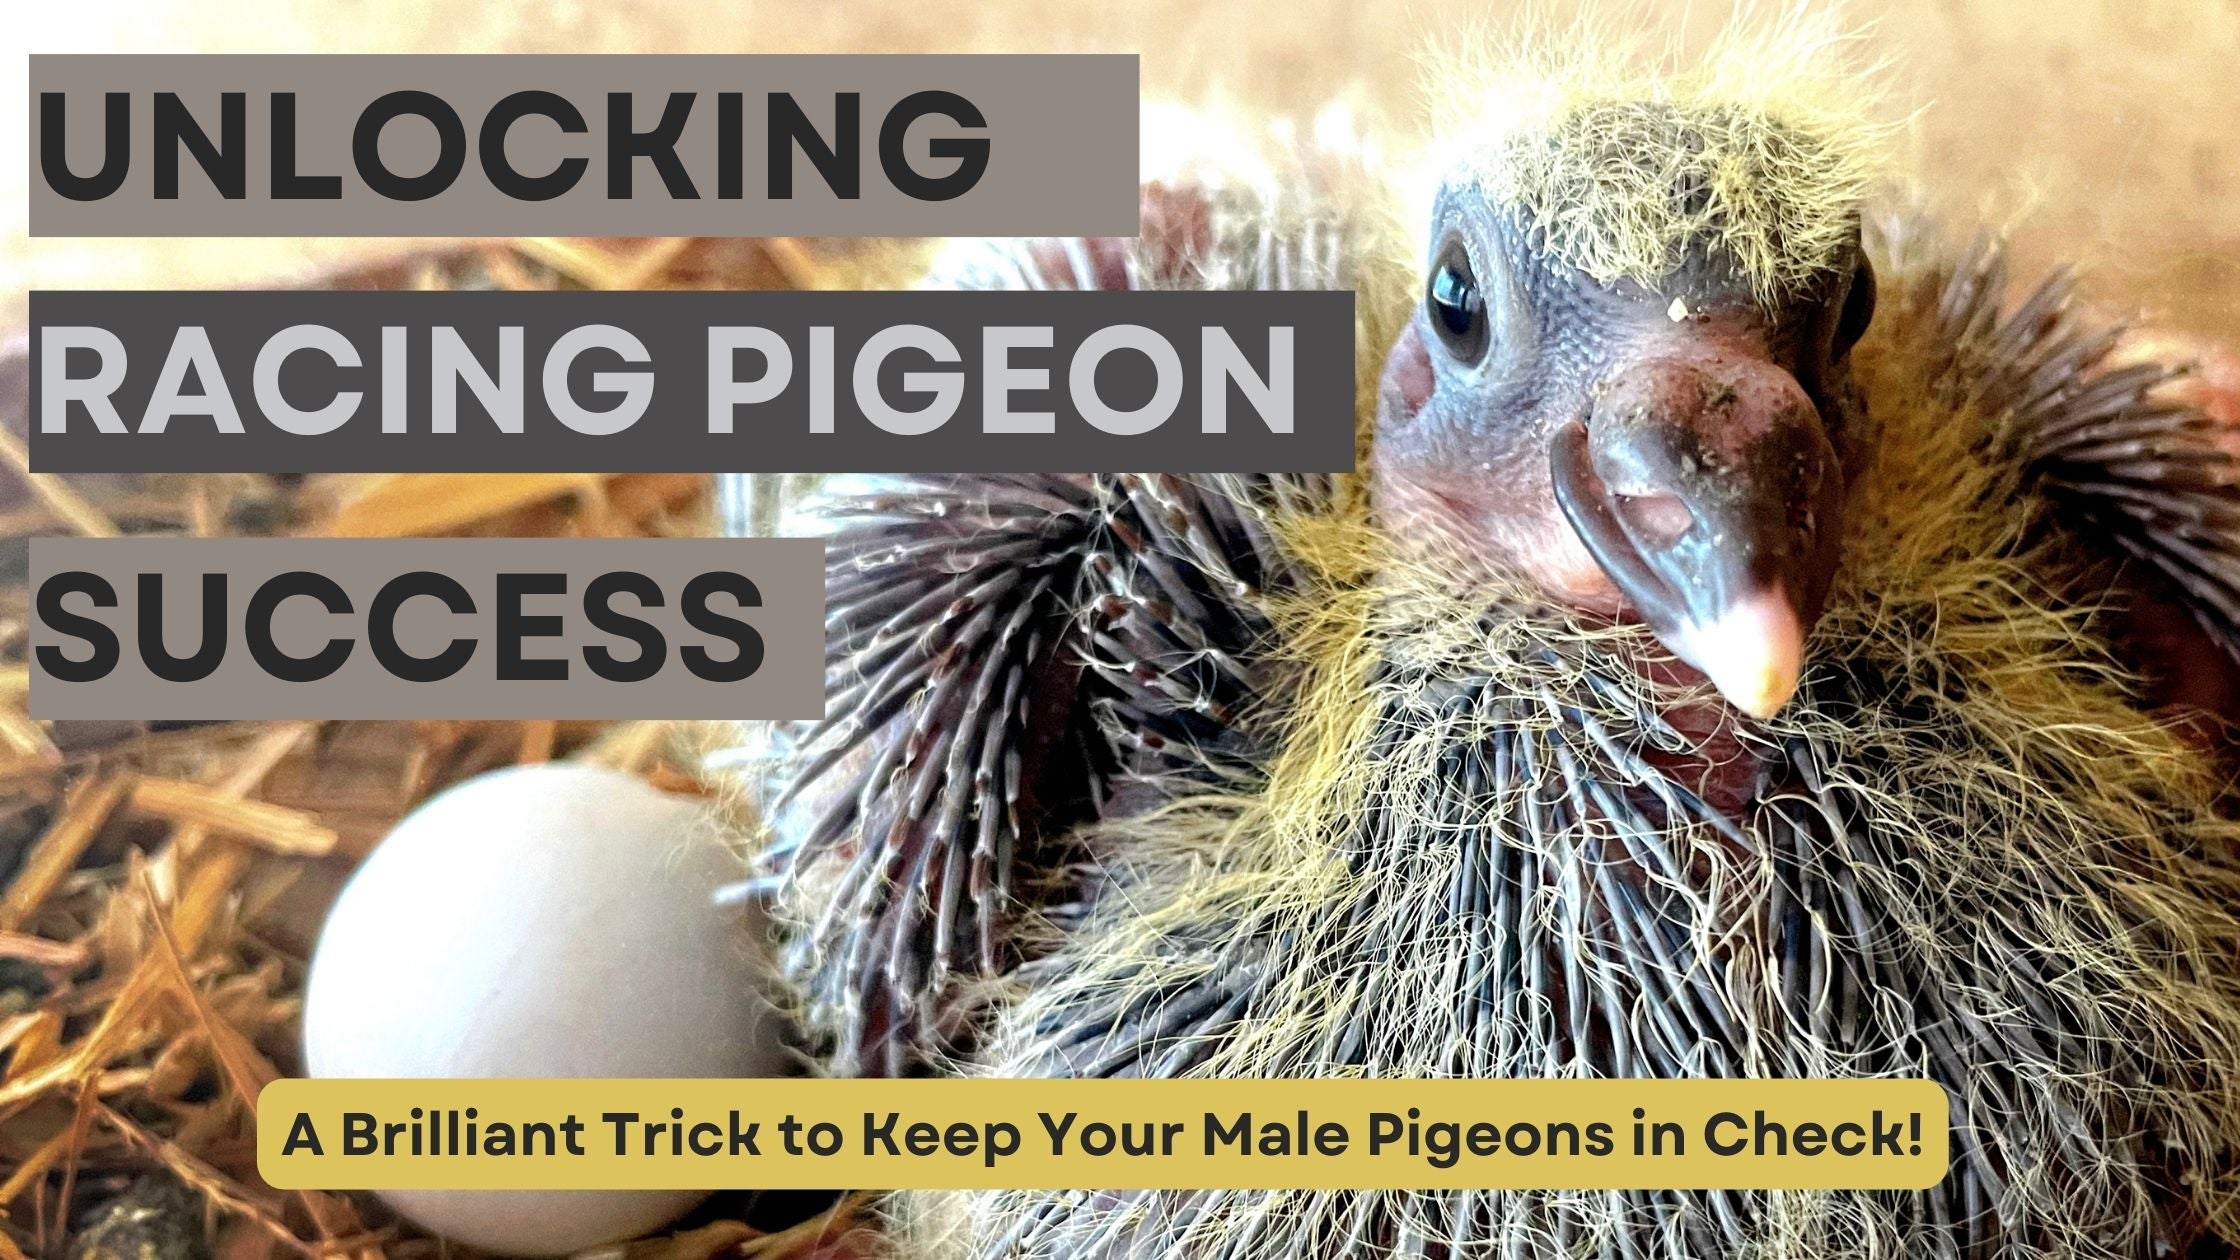 Unlocking Pigeon Racing Success: A Brilliant Trick to Keep Your Male Pigeons in Check!